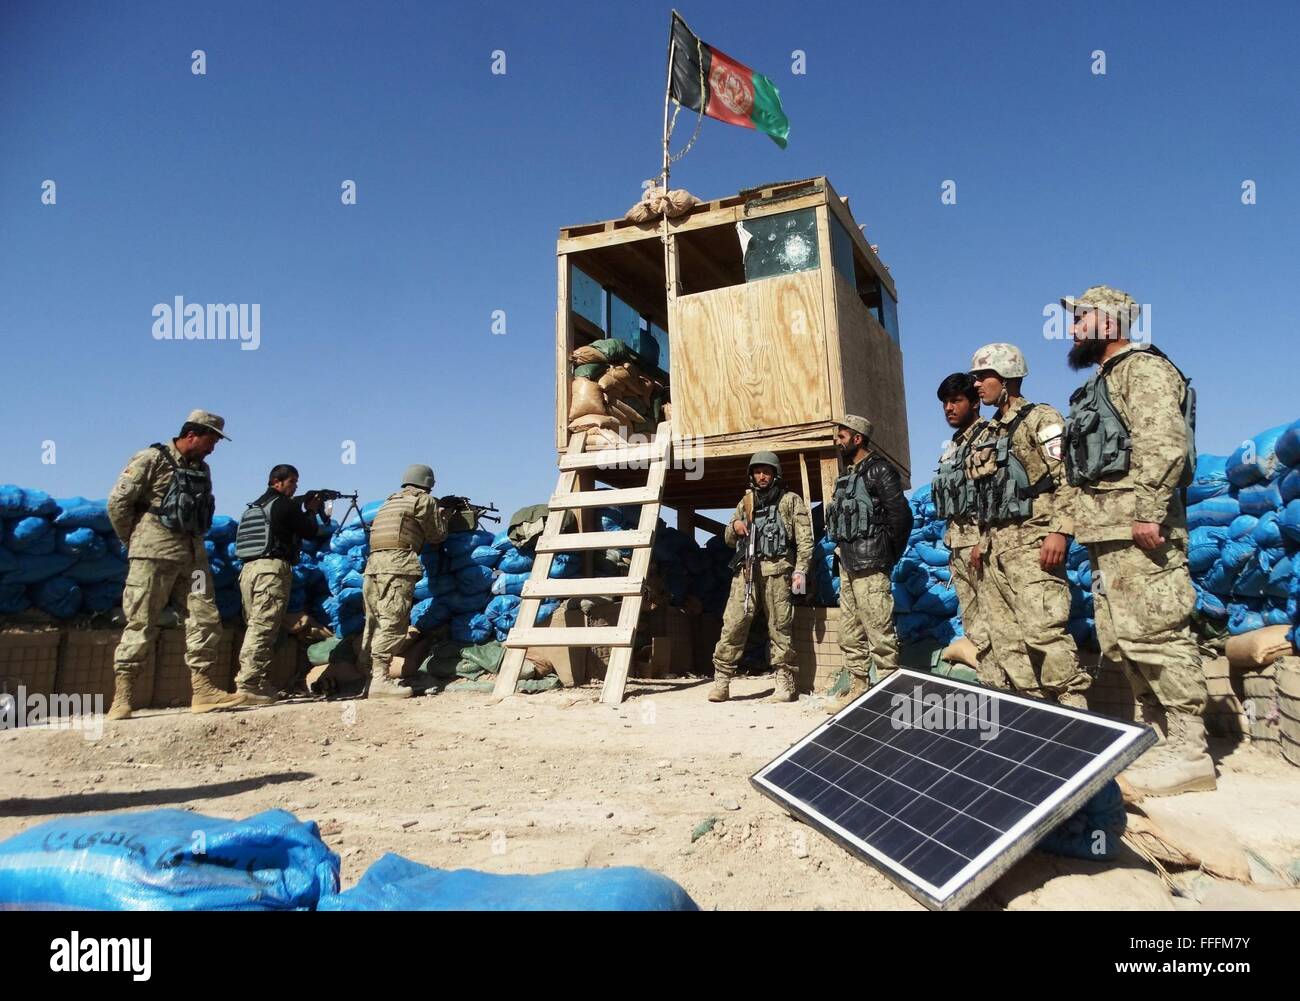 Helmand, Afghanistan. 12th Feb, 2016. Afghan security force members take part in a military operation in Nad Ali district of the southern Helmand province, Afghanistan, Feb. 12, 2016. Some 36 militants were killed amid military operations carried out by Afghan National Security Forces (ANSF) on Thursday, spokesman of the country's Defense Ministry said on Friday. © Abdul Aziz Safdari/Xinhua/Alamy Live News Stock Photo